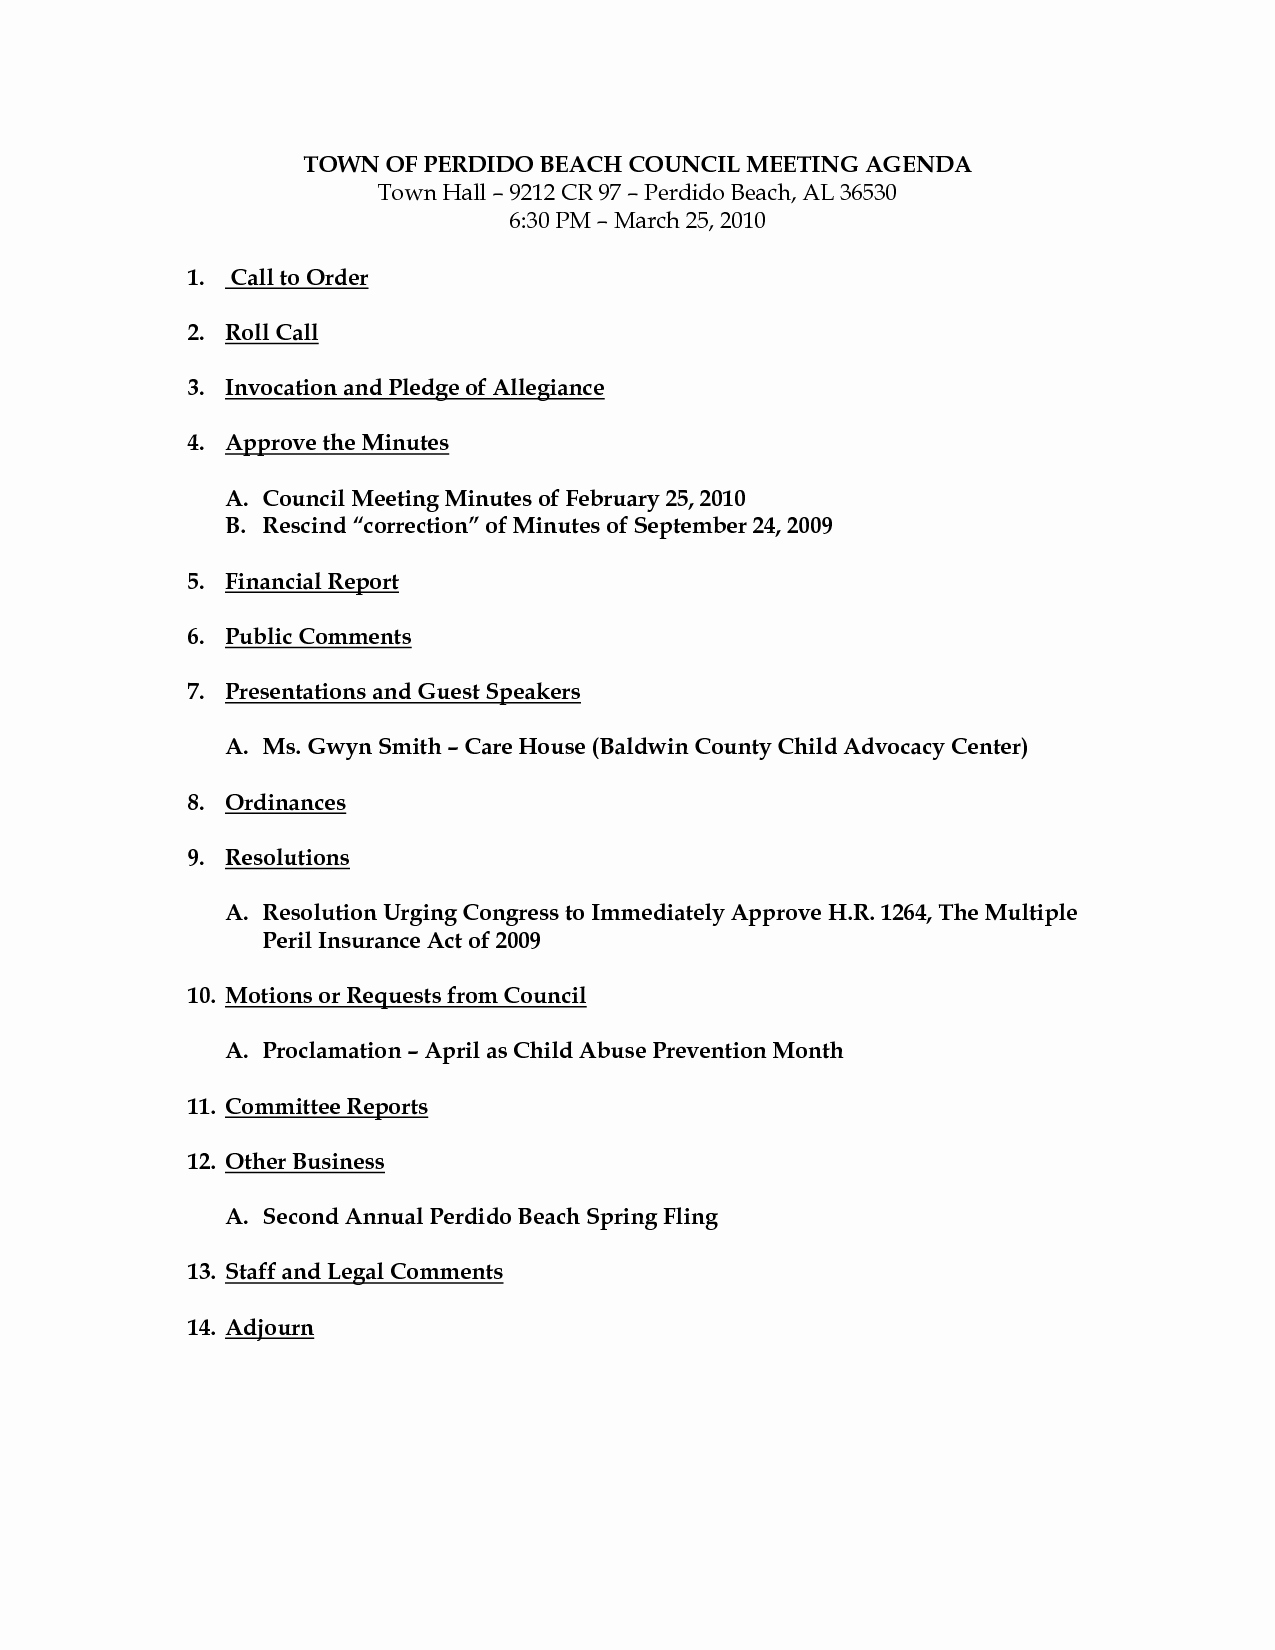 Town Hall Meeting Agenda Template New Agenda Template Category Page 8 Efoza